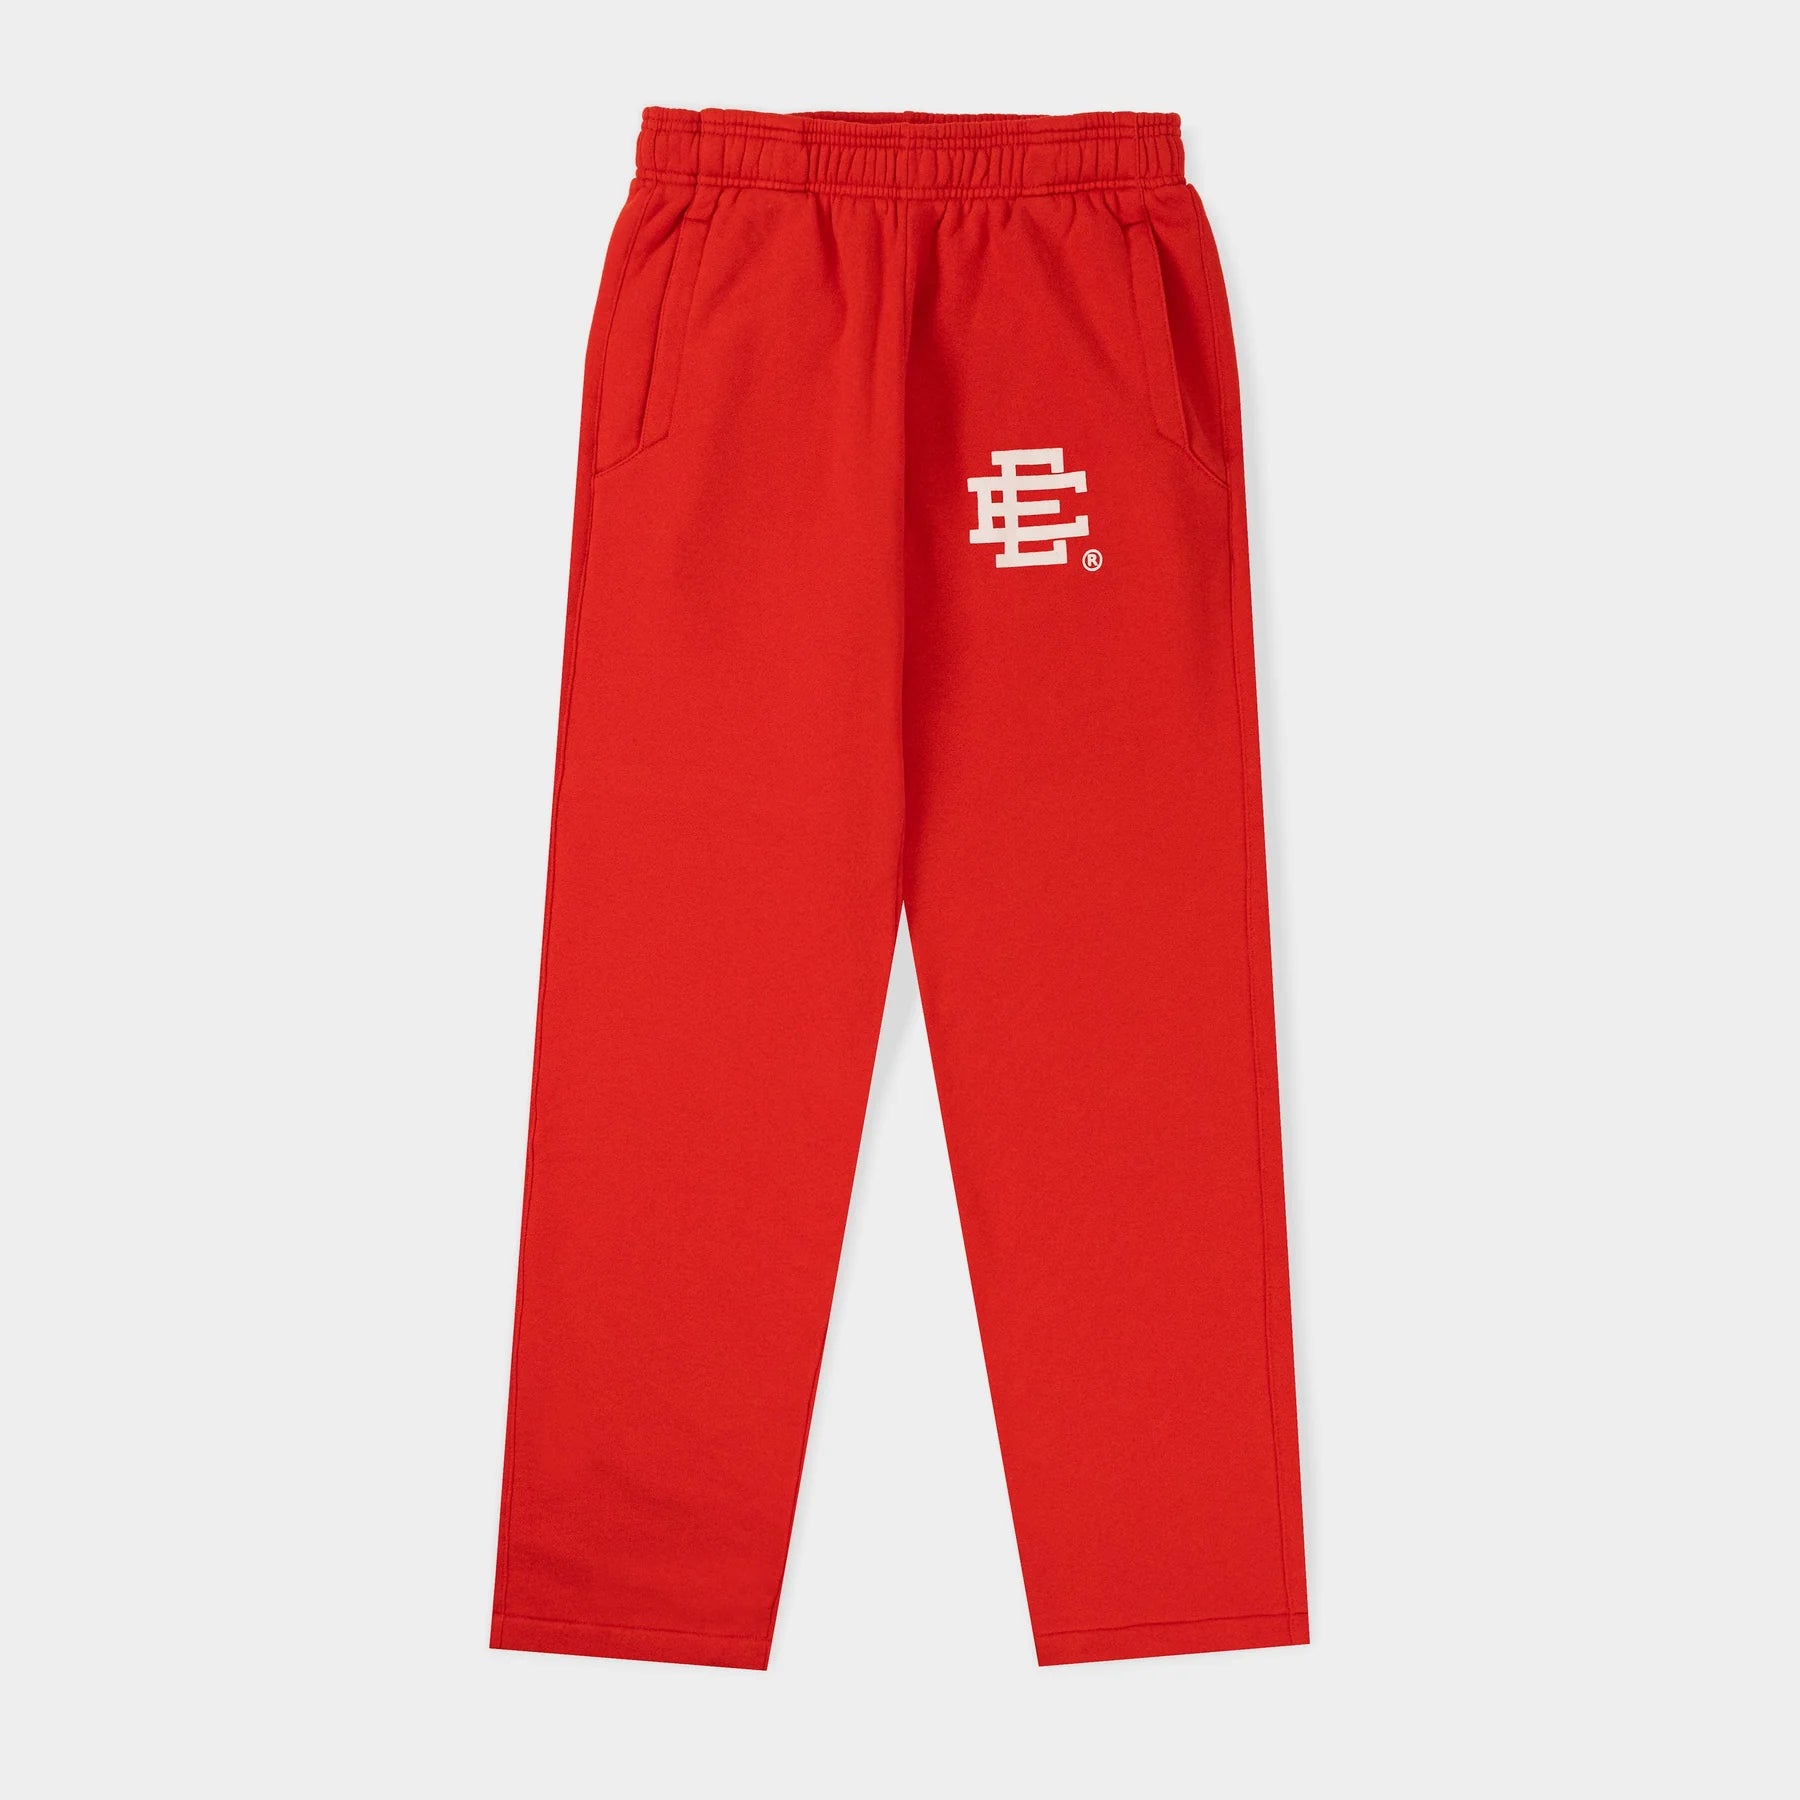 Eric Emanuel Red White Sweatpants Front View